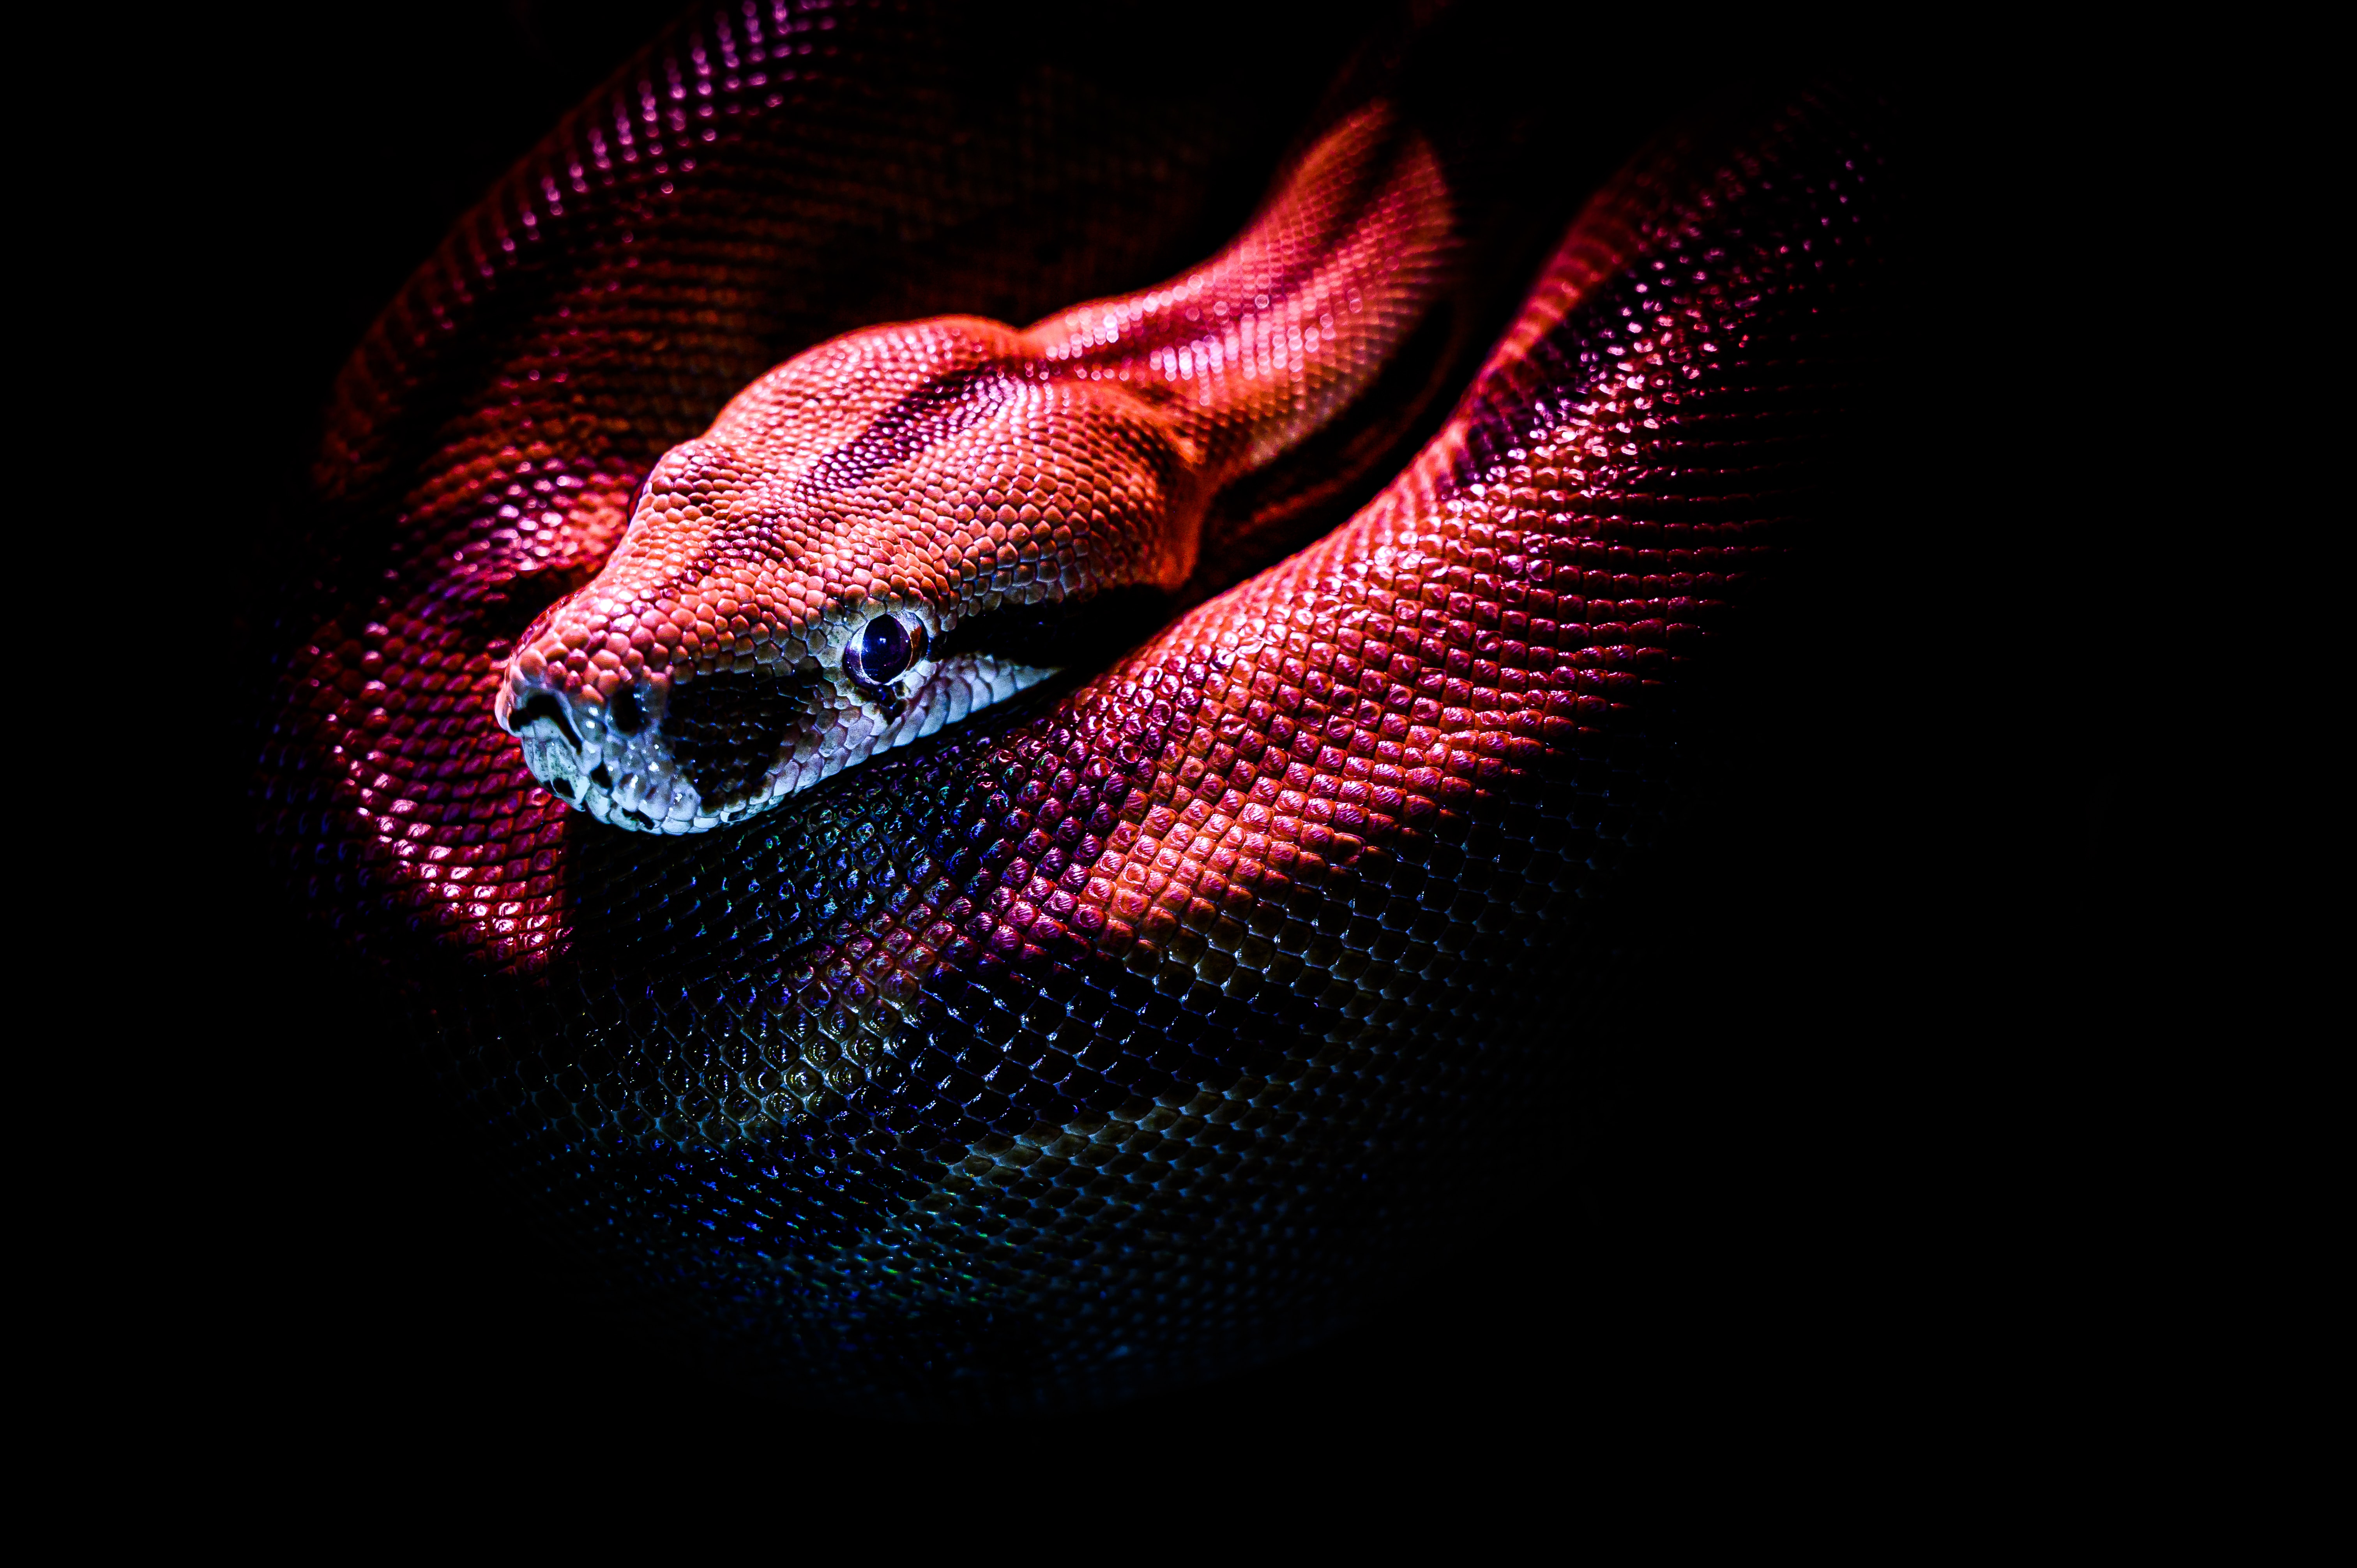 59837 free wallpaper 720x1520 for phone, download images dark, reptile, snake, red 720x1520 for mobile